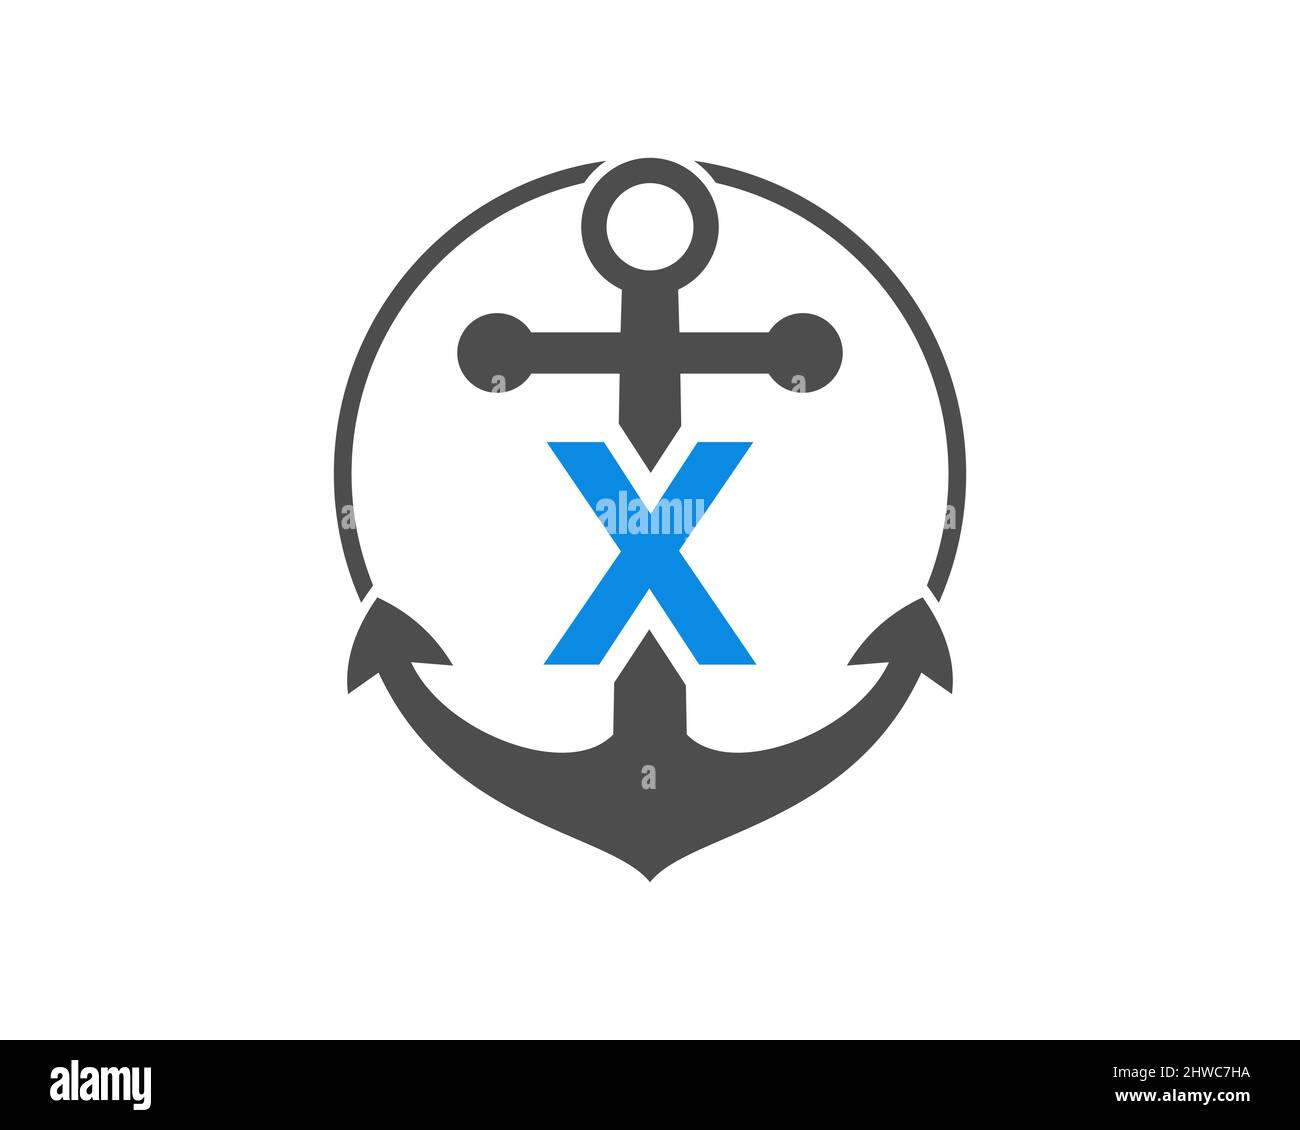 Anchor logo with X letter Concept. Initial X letter with Anchor